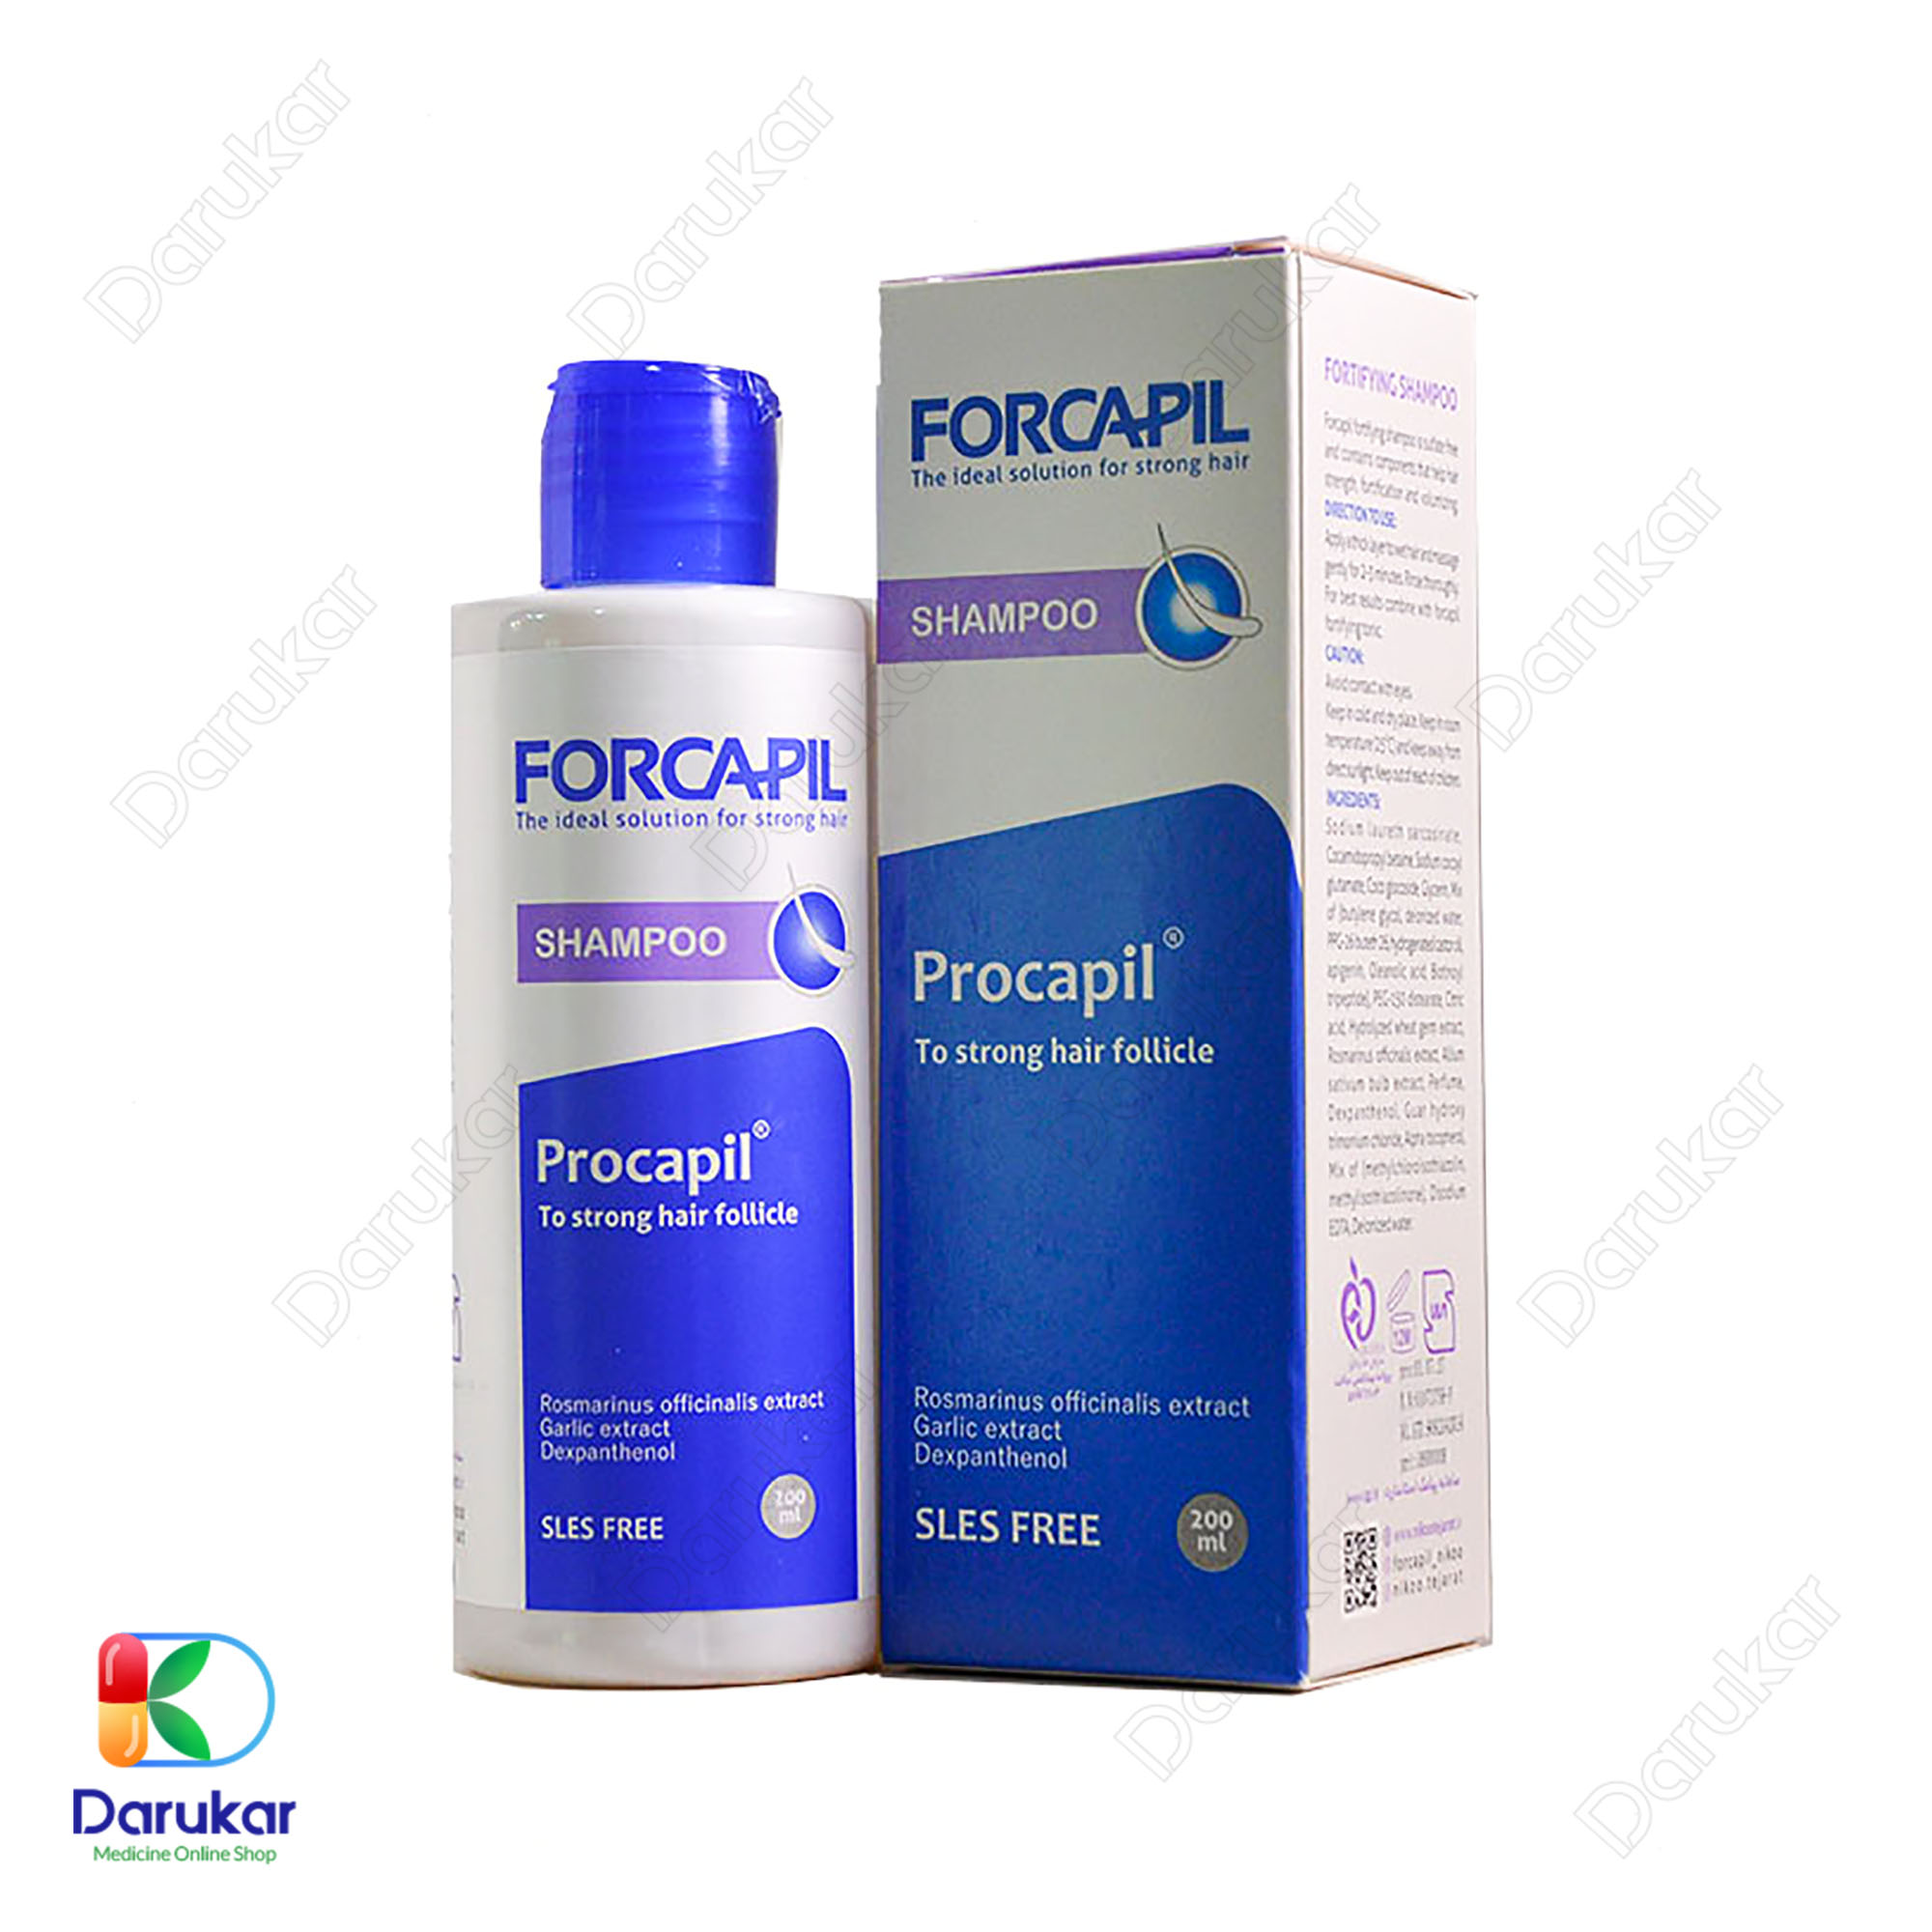 forcapil fortifying shampoo 3